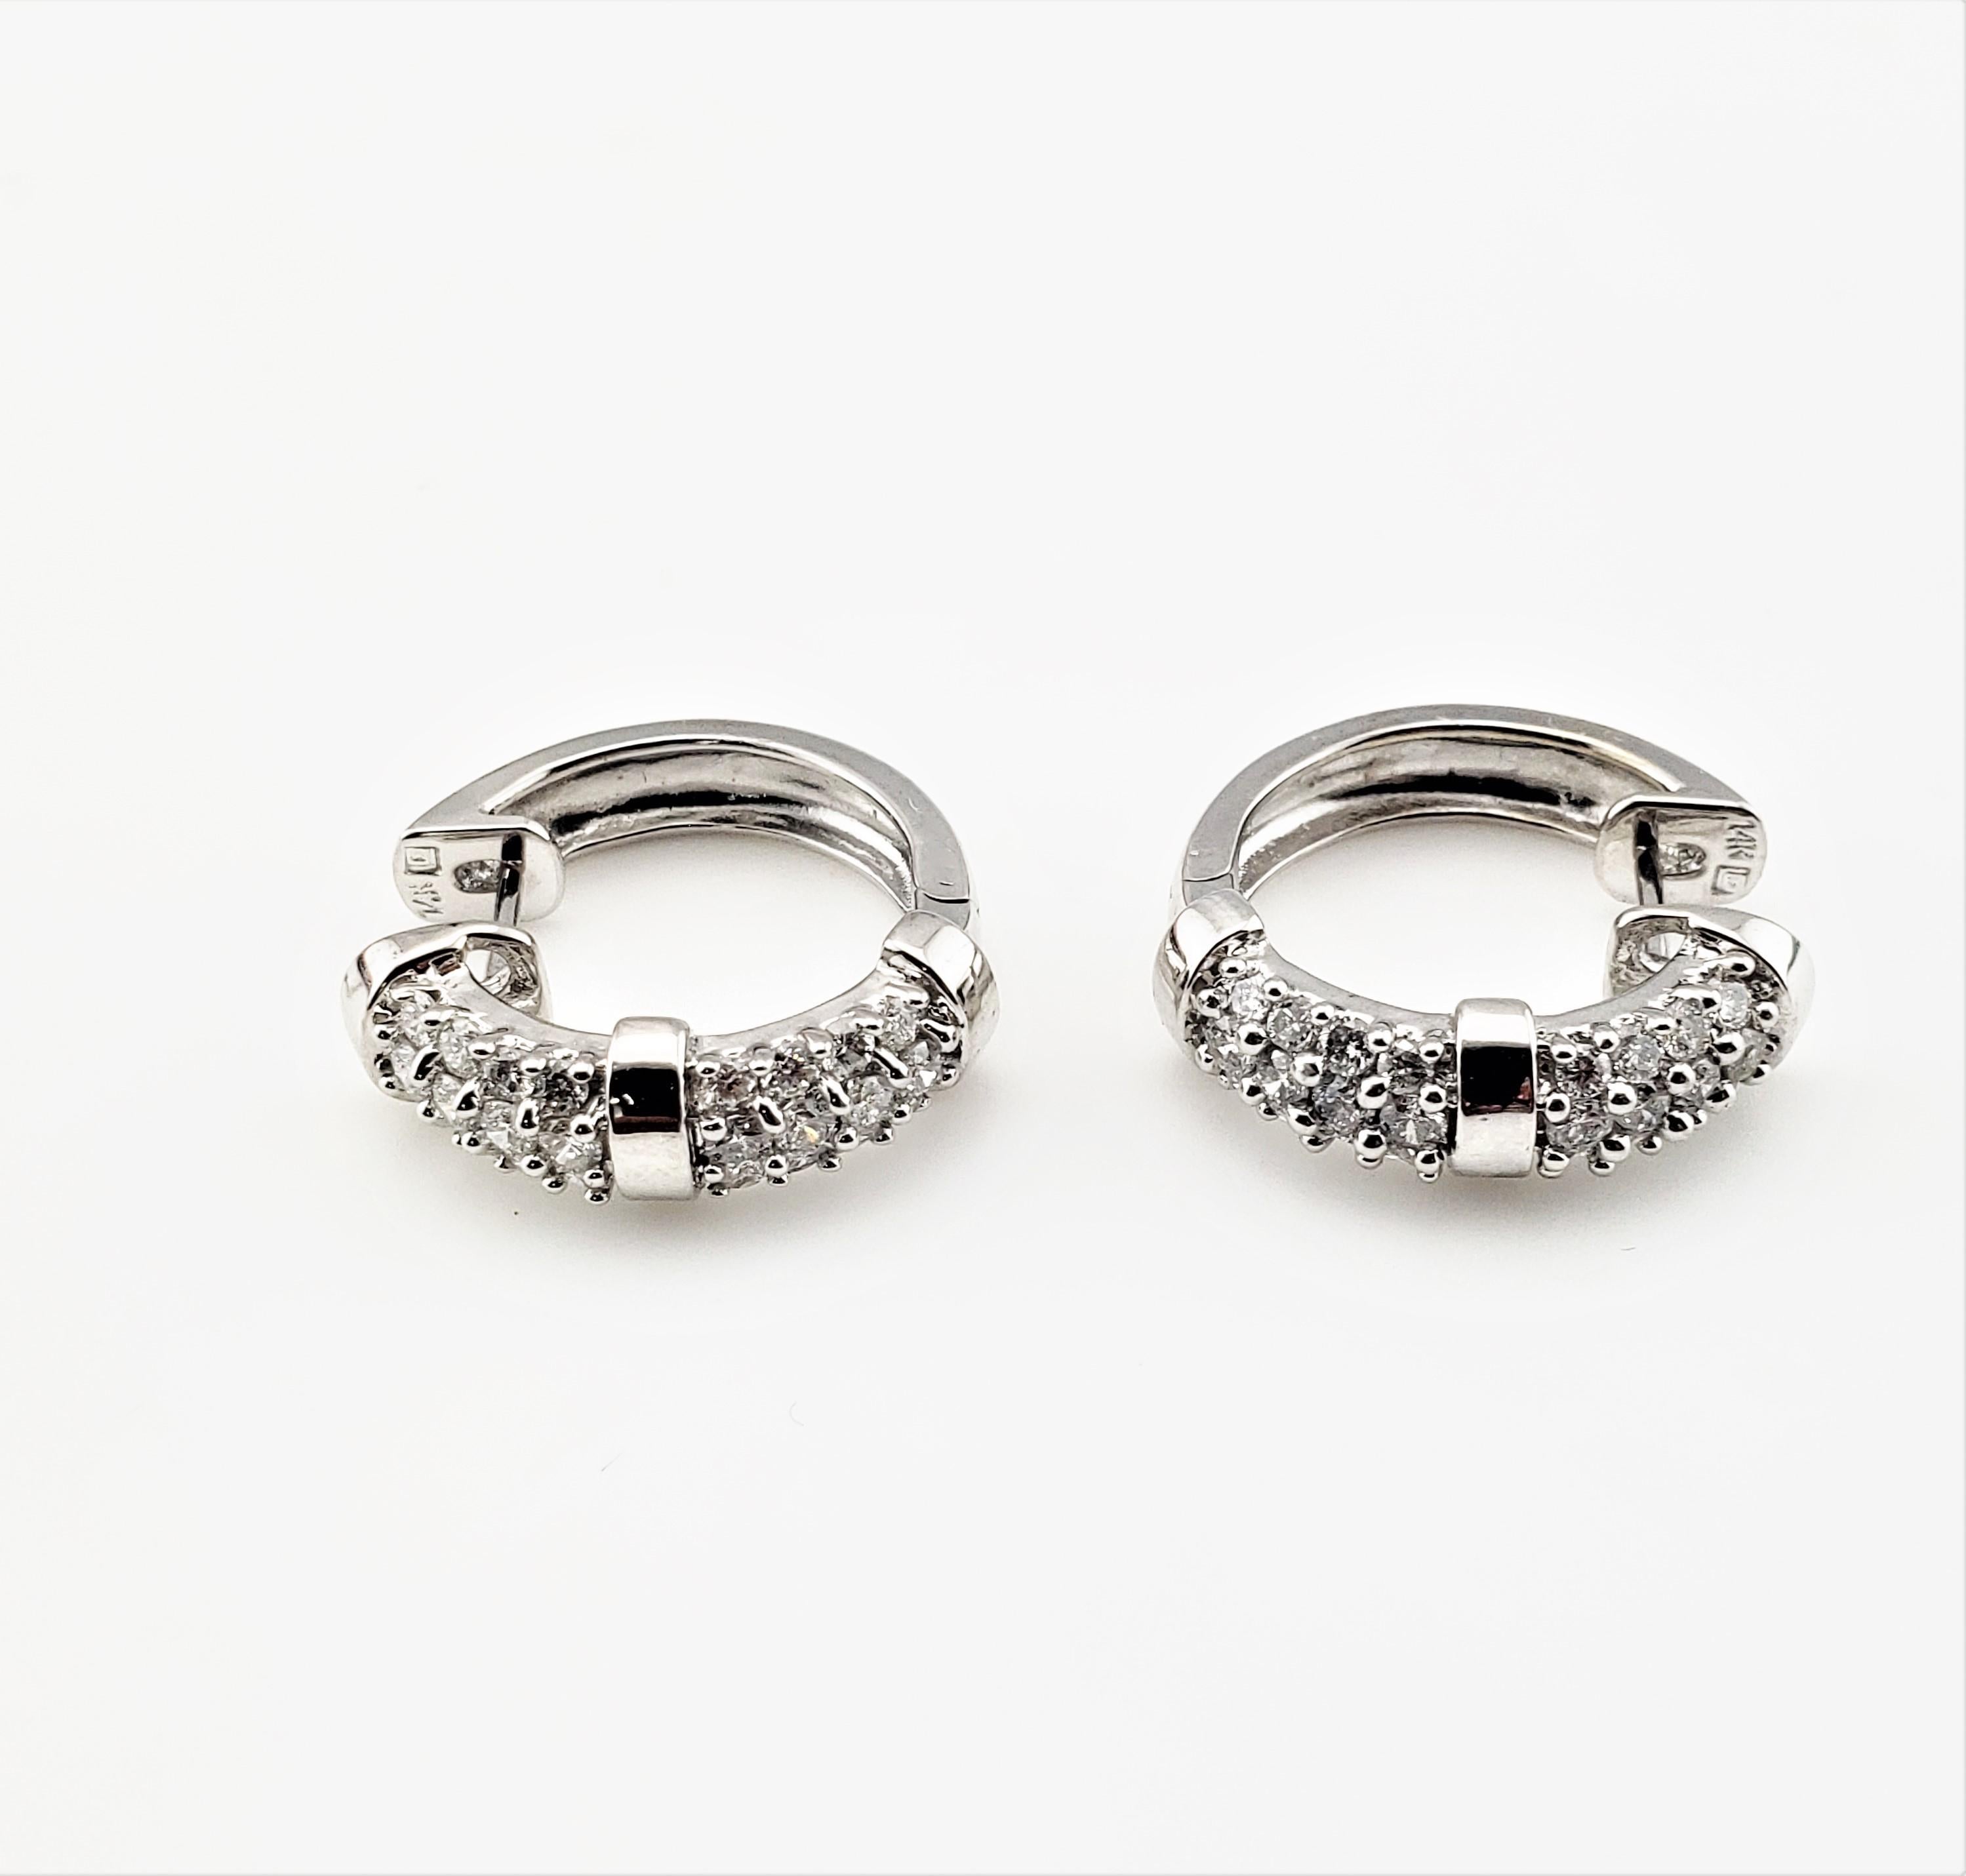 Vintage 14 Karat White Gold and Diamond Hoop Earrings-

These sparkling hinged hoop earrings each feature 24 round brilliant cut diamonds set in beautifully detailed 14K white gold.
Width: 5 mm.

Approximate total diamond weight: .72 ct.

Diamond